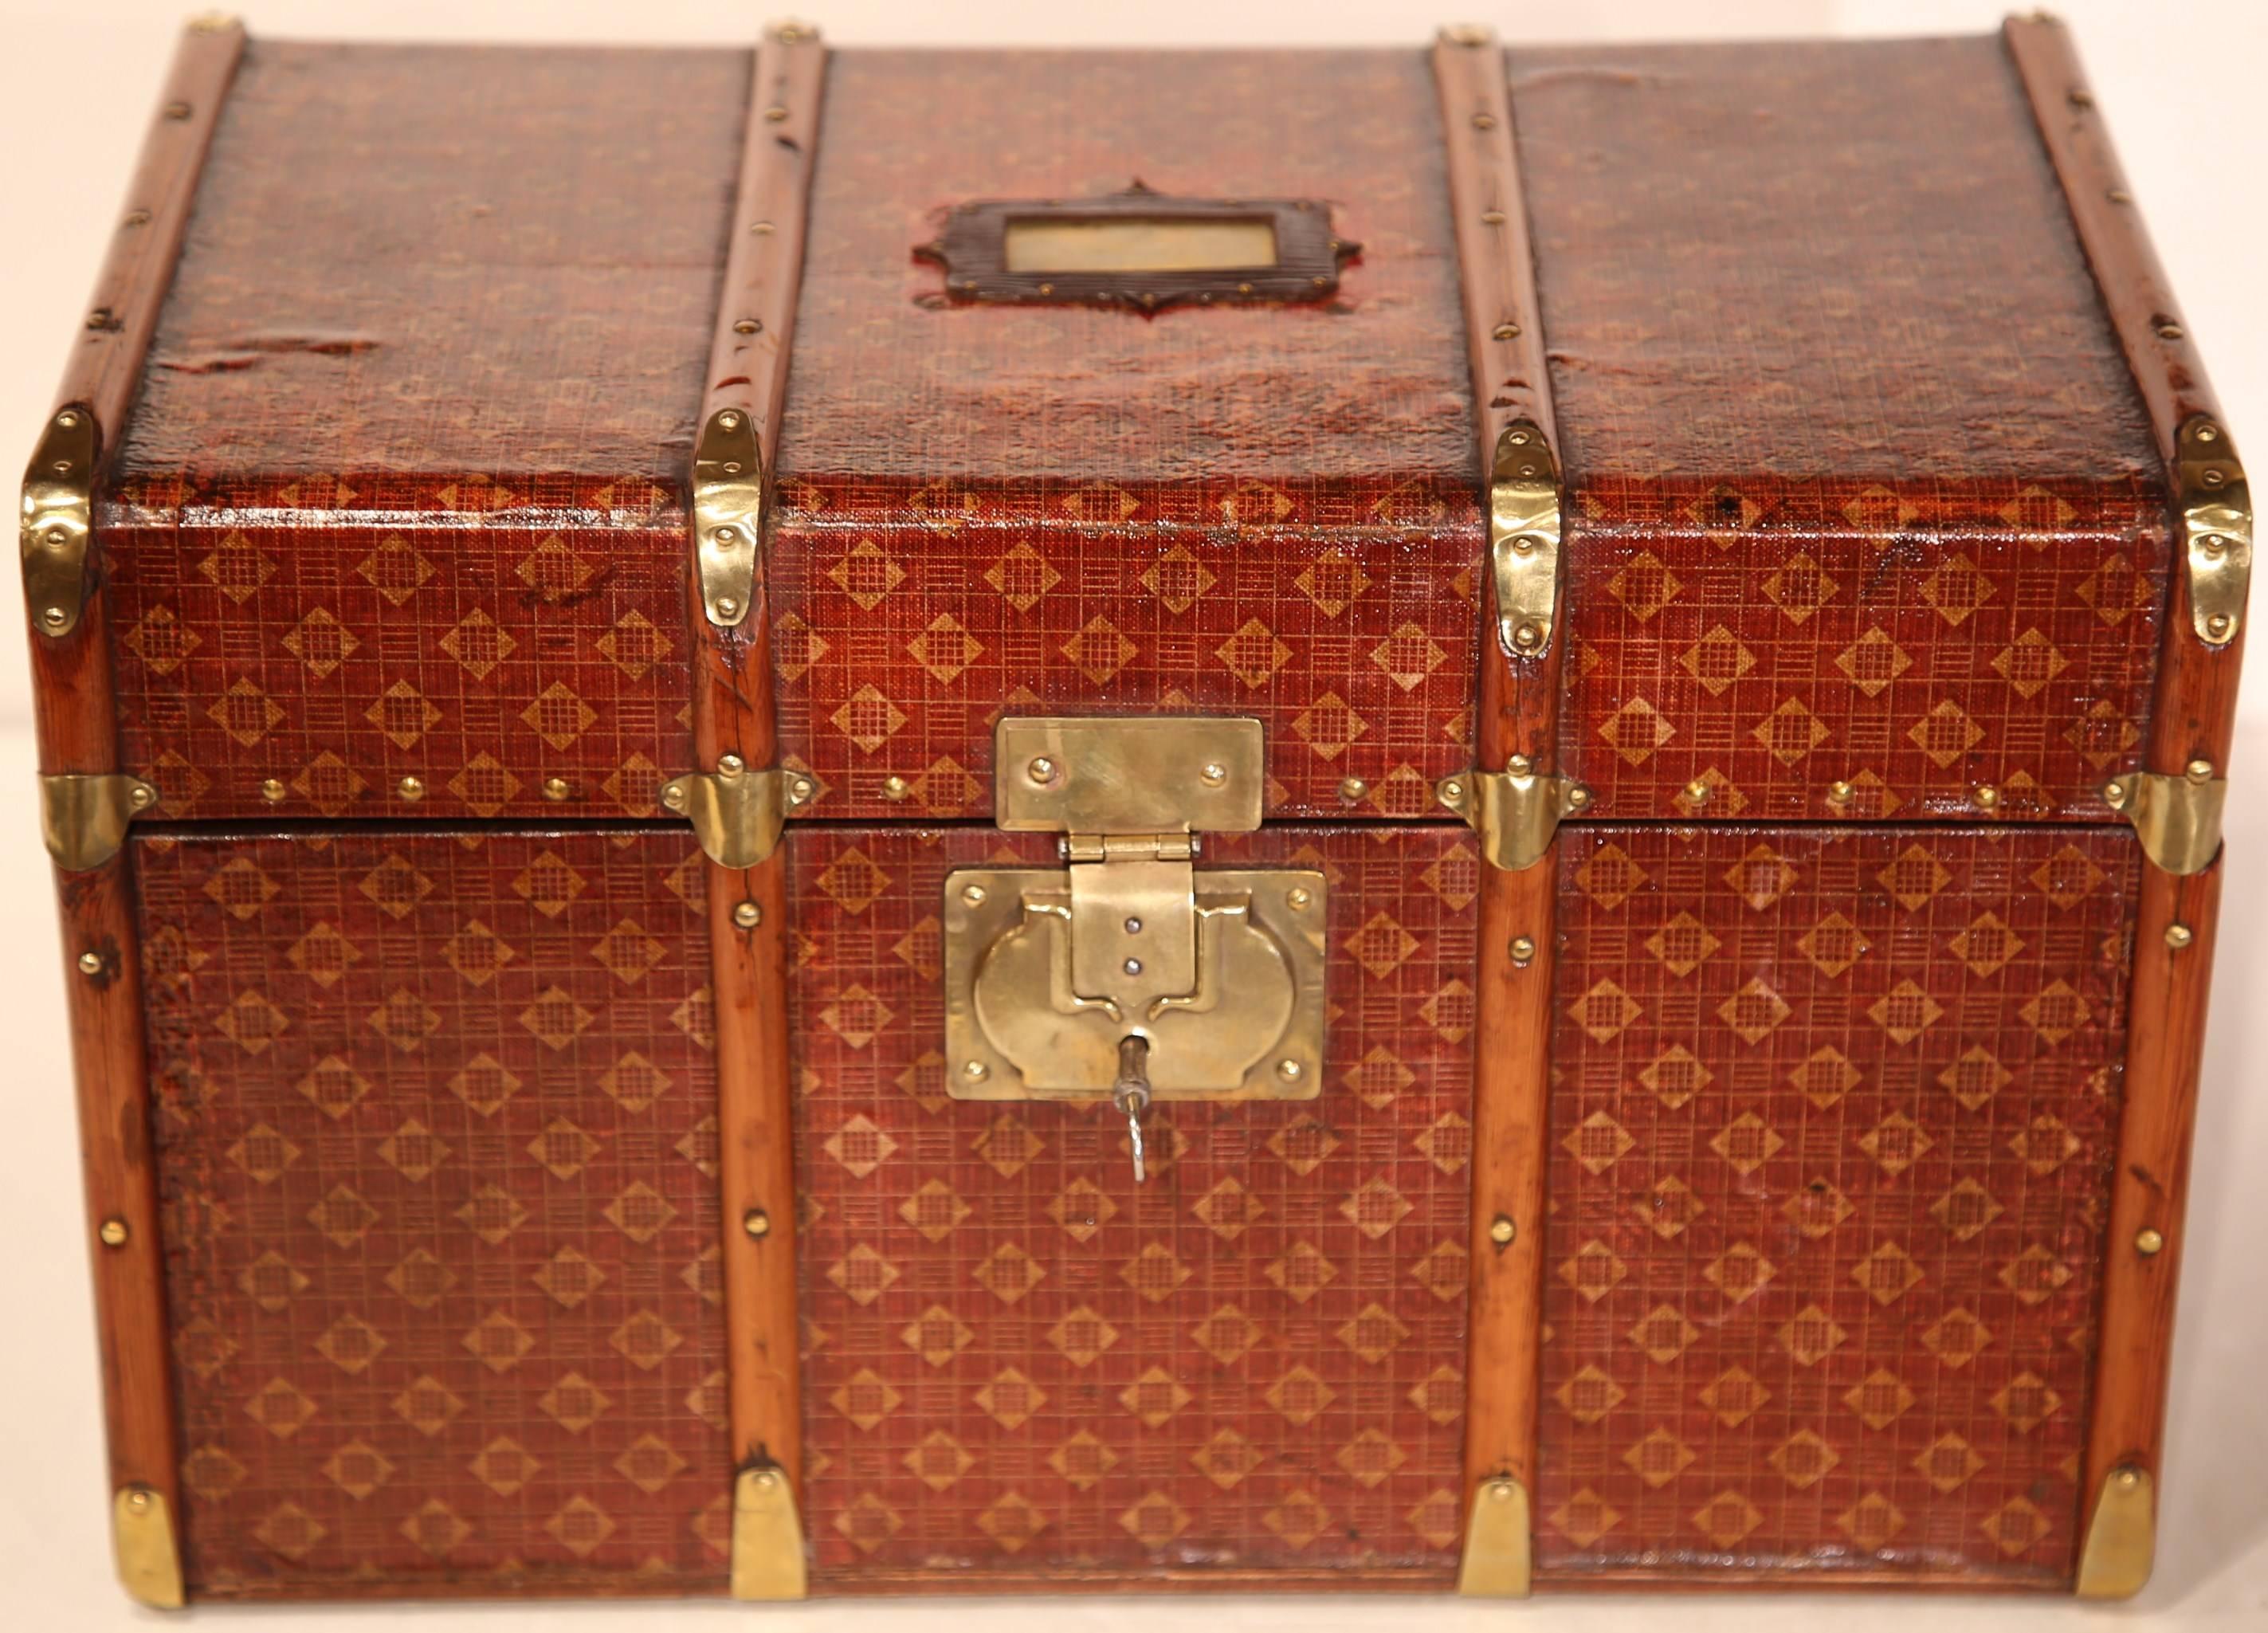 Stow your jewelry and other treasures inside this elegant, antique wooden box. Crafted in France, circa 1880, this decorative trunk is covered with leather, has wood trim and is studded with brass hardware and lock mechanism. Similar to a Louis